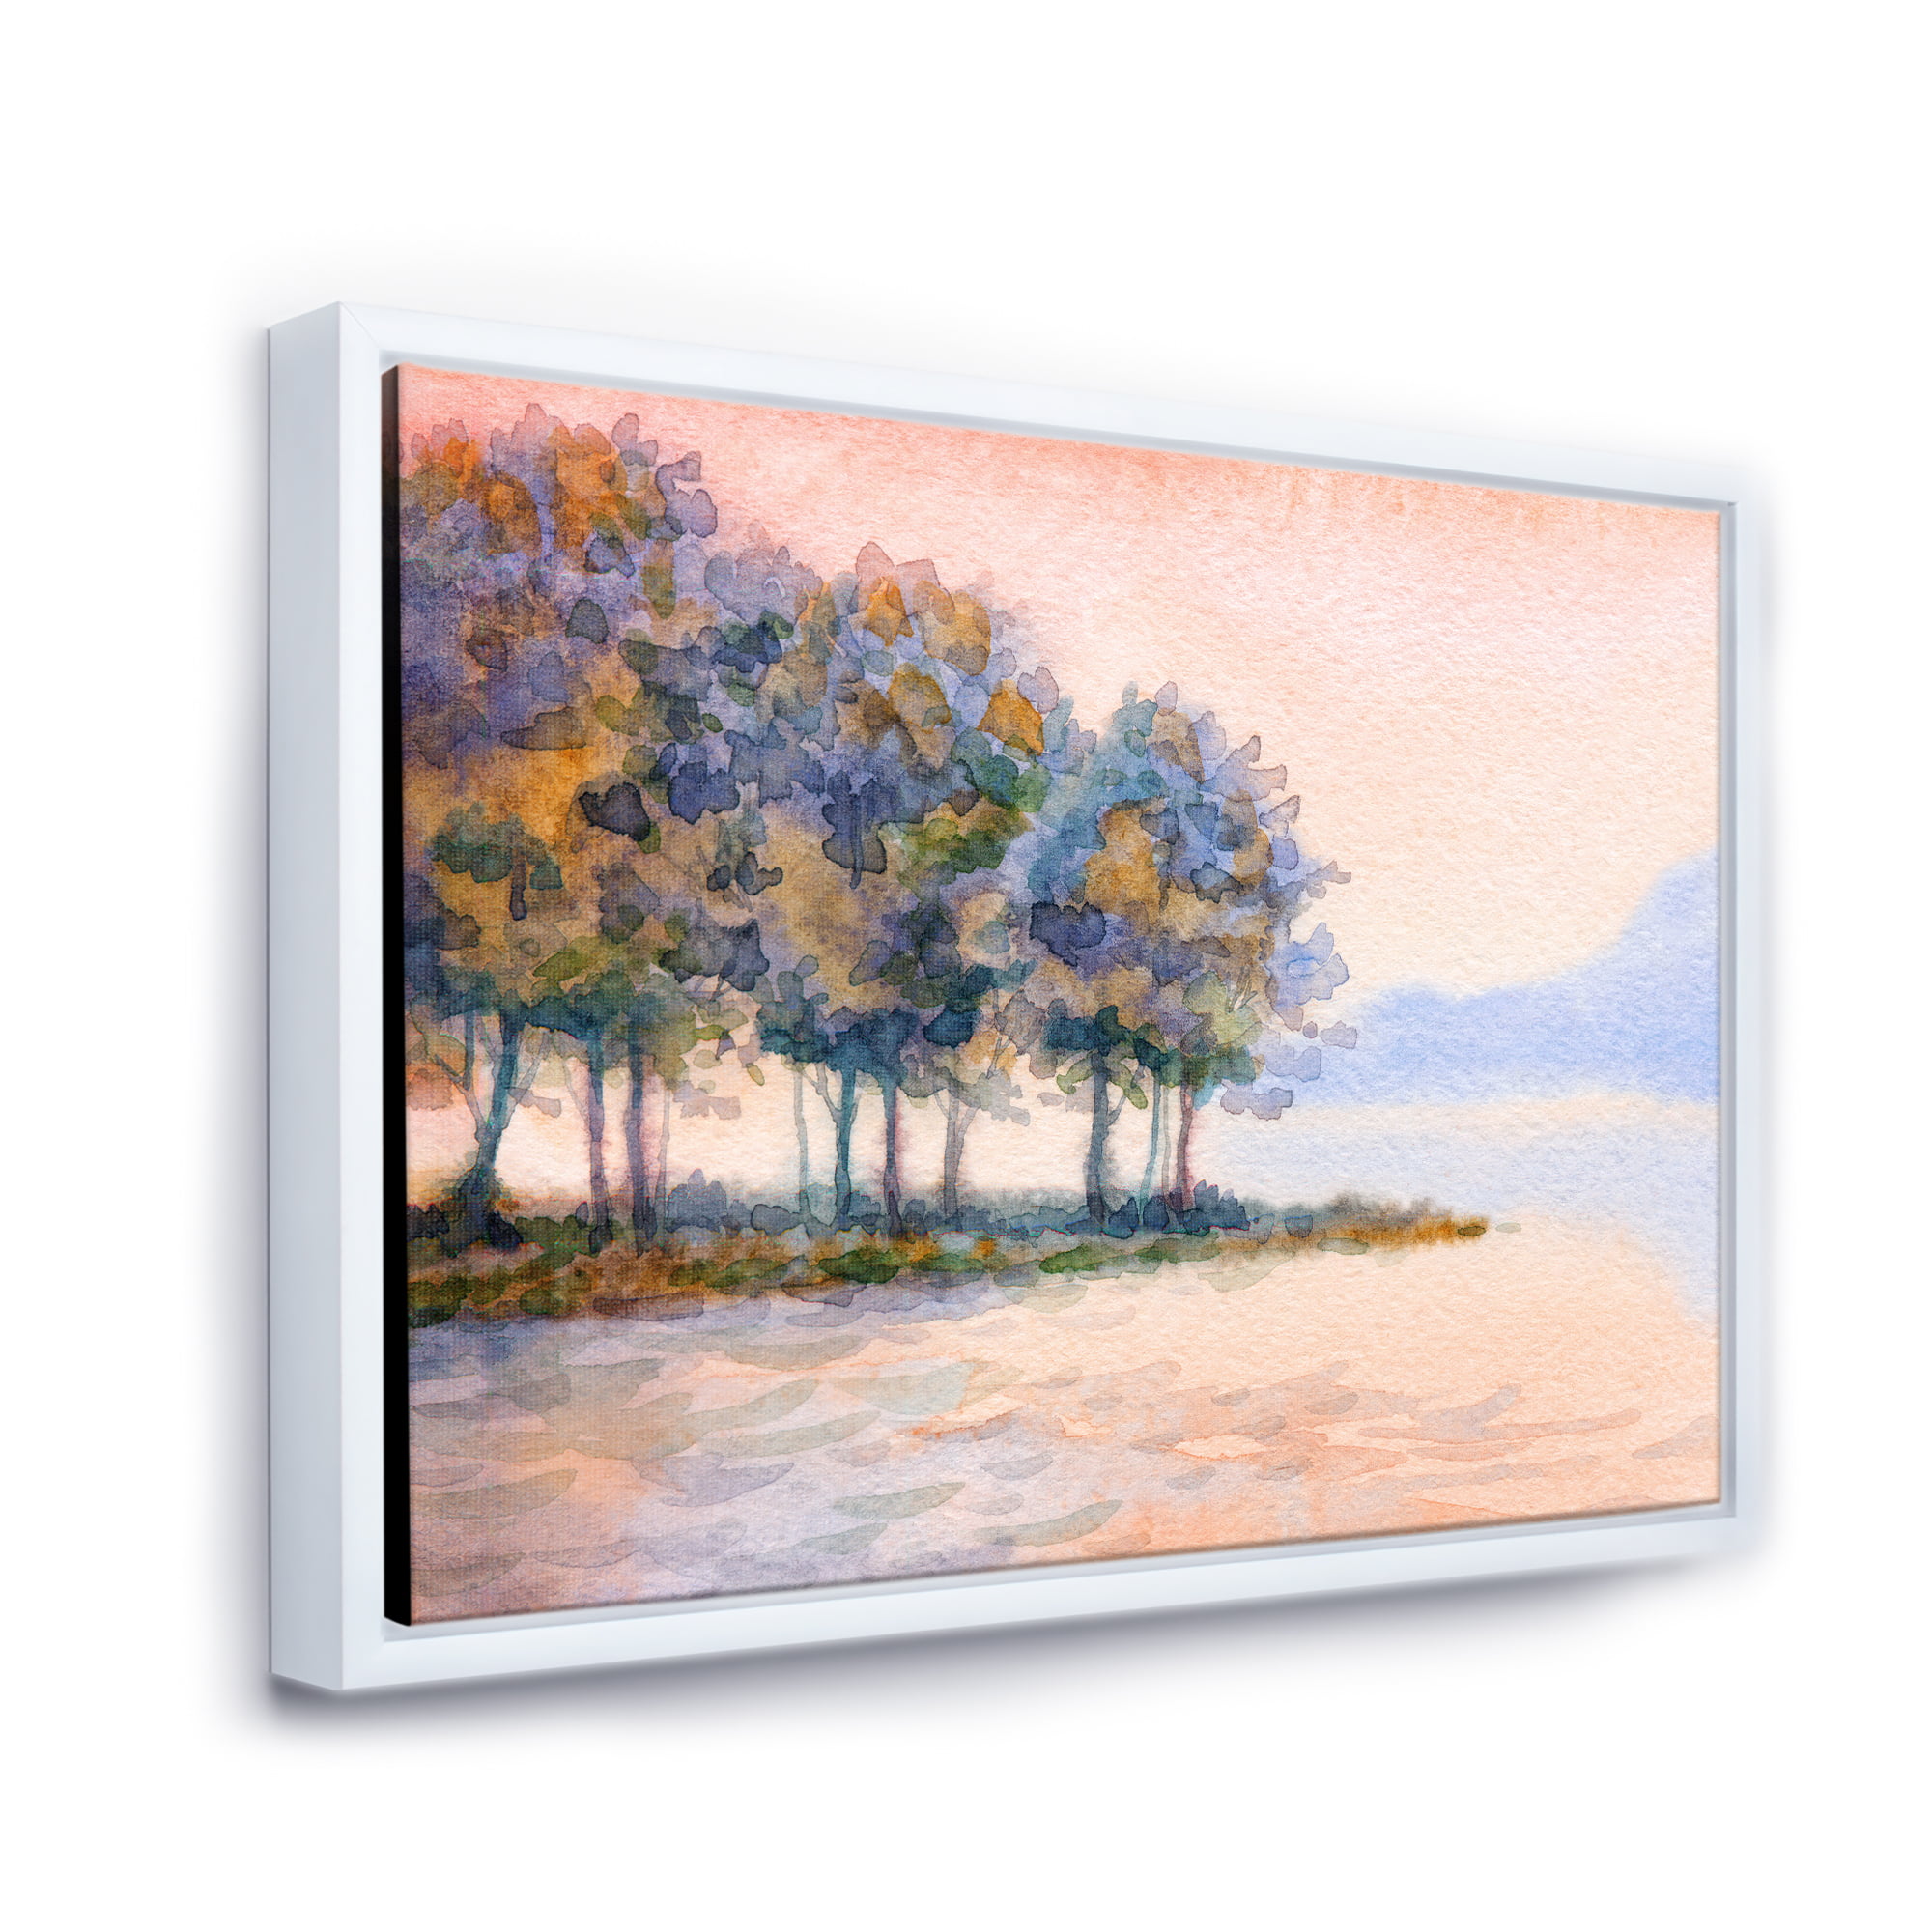 COUNTRYSIDE FIELD SUNSET LANDSCAPE CANVAS PICTURE PRINT WALL ART #4869 